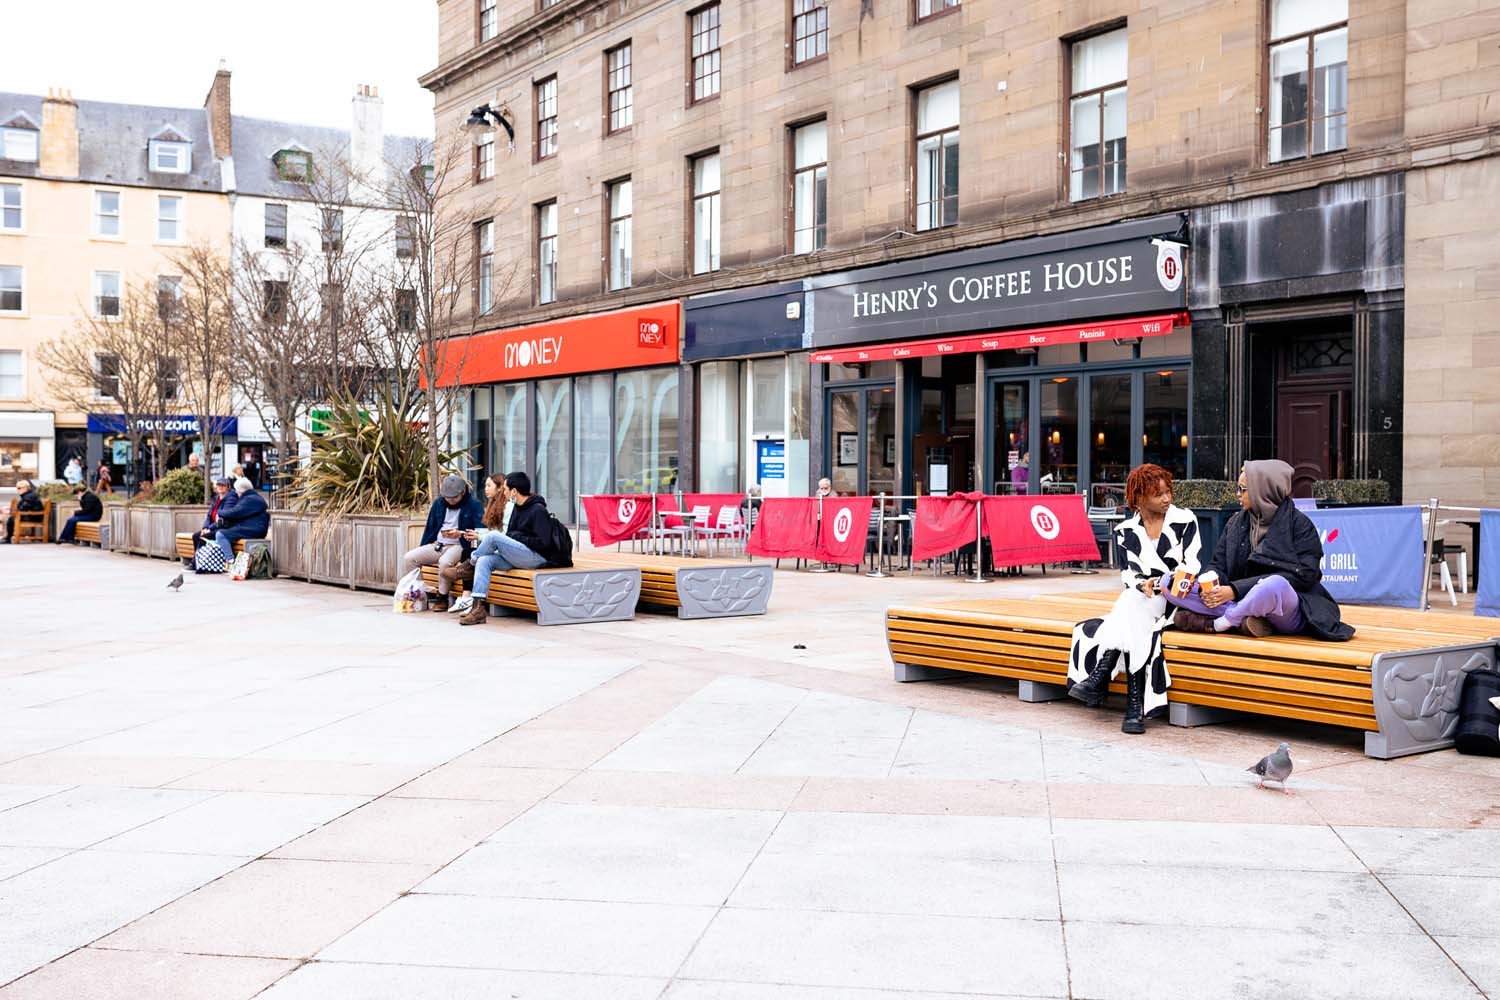 A pedestrianised street, with people sitting on benches chatting to each other. Behind them there is a sandstone building with a café on the ground floor.